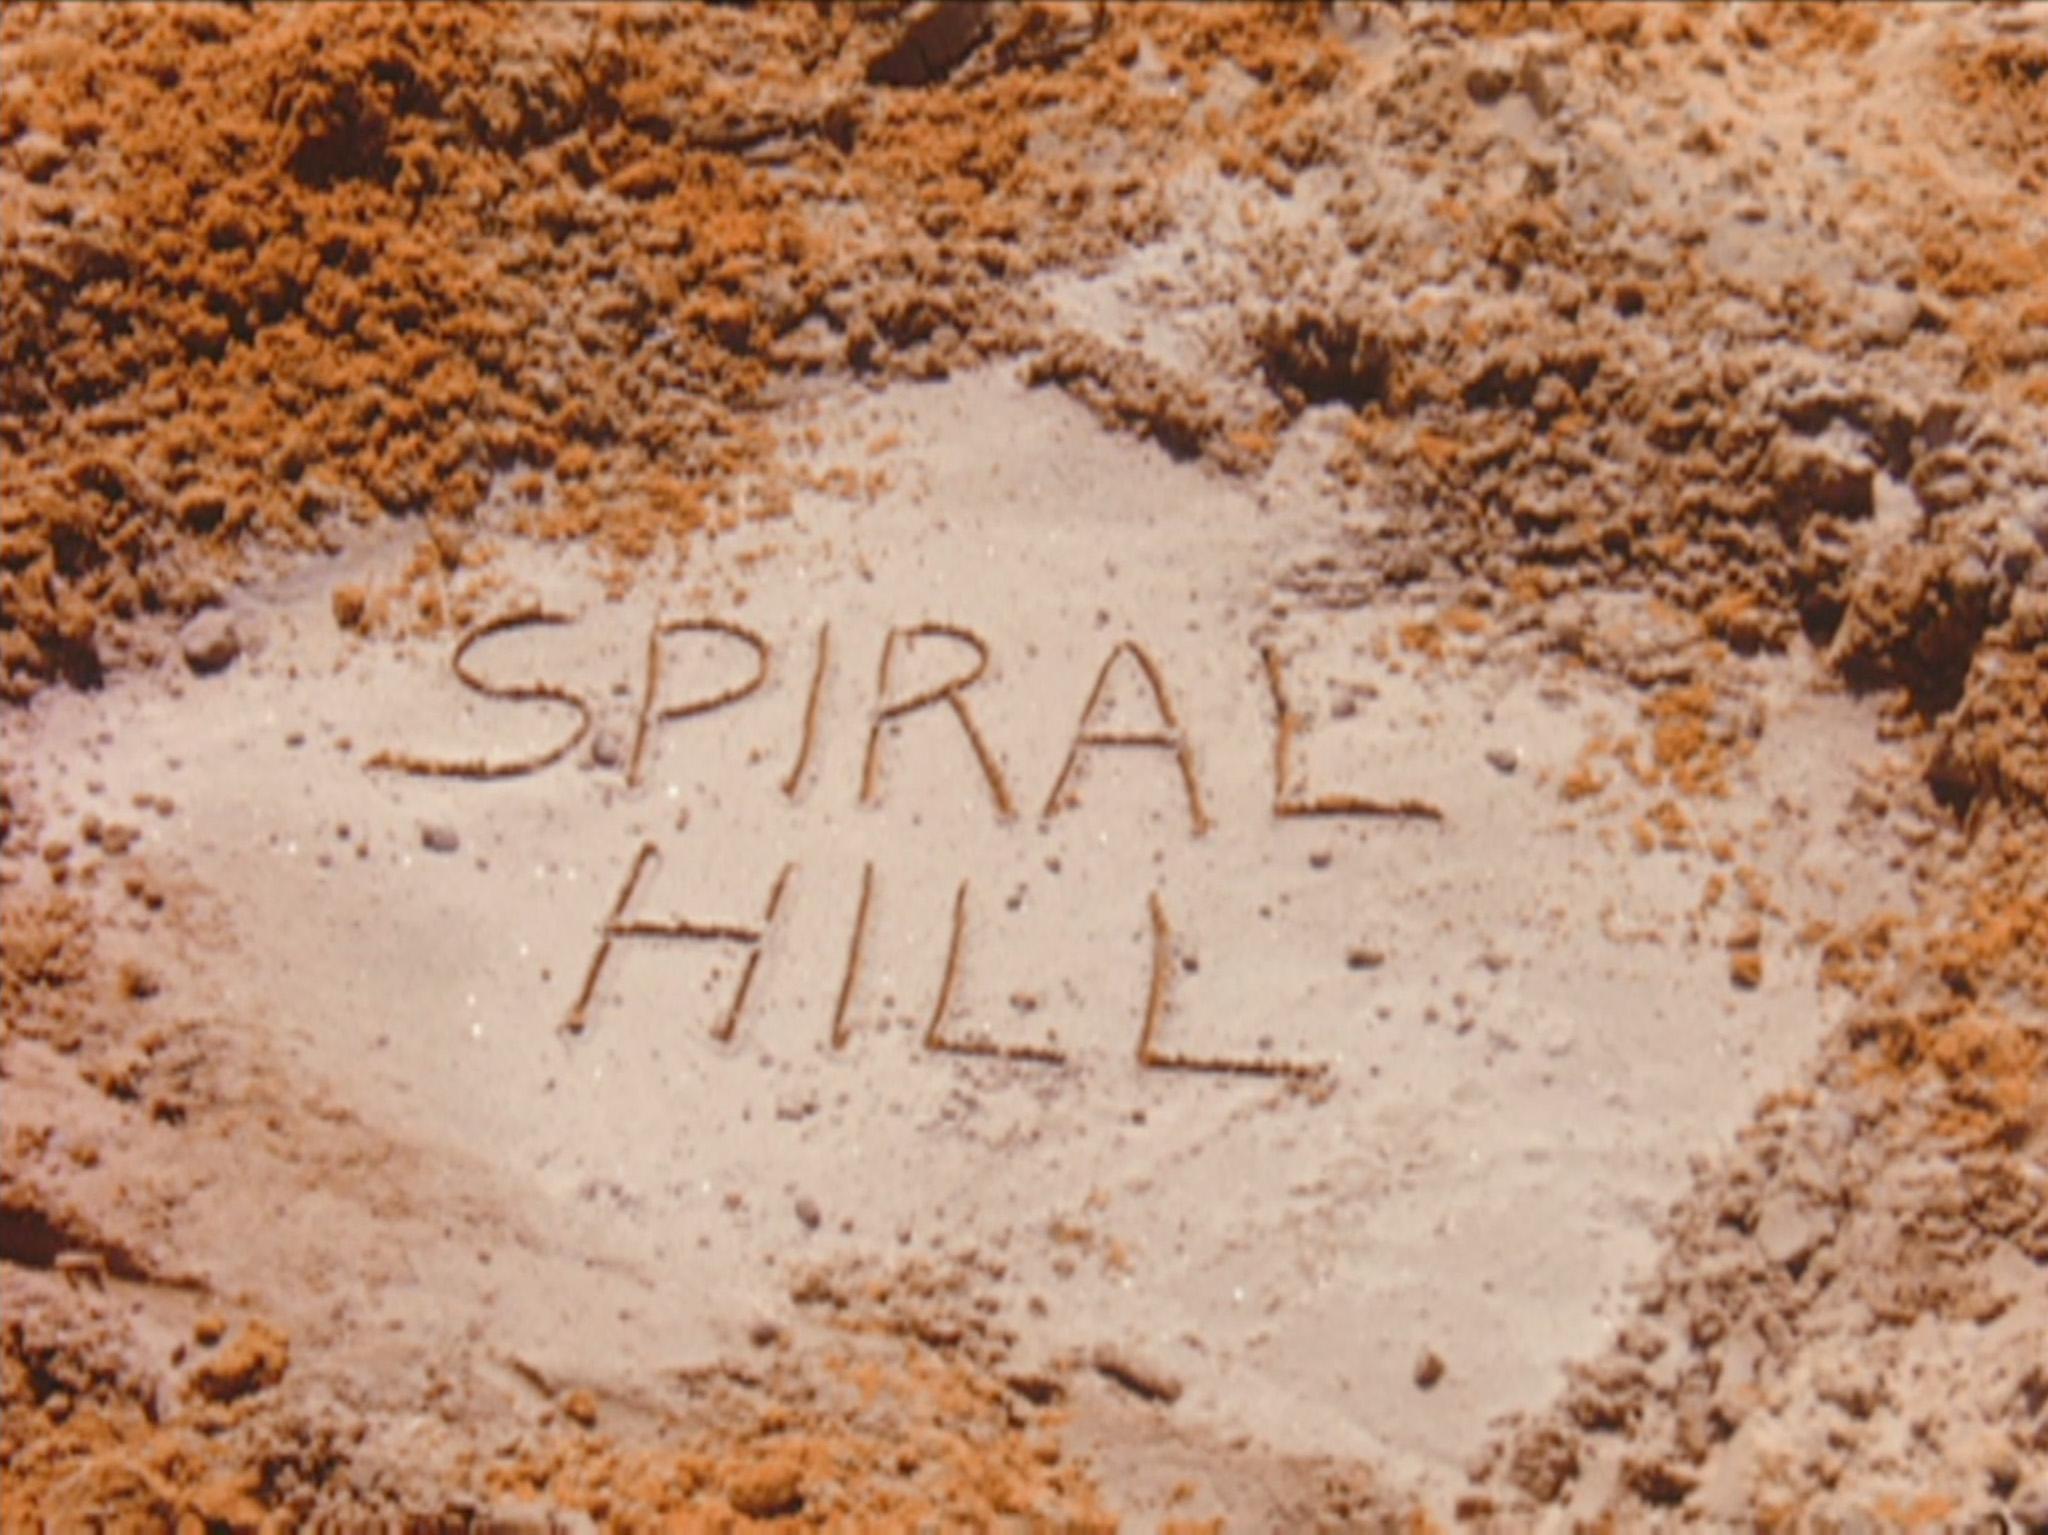 a still from Breaking Ground that shows Spiral Hill written in the sand